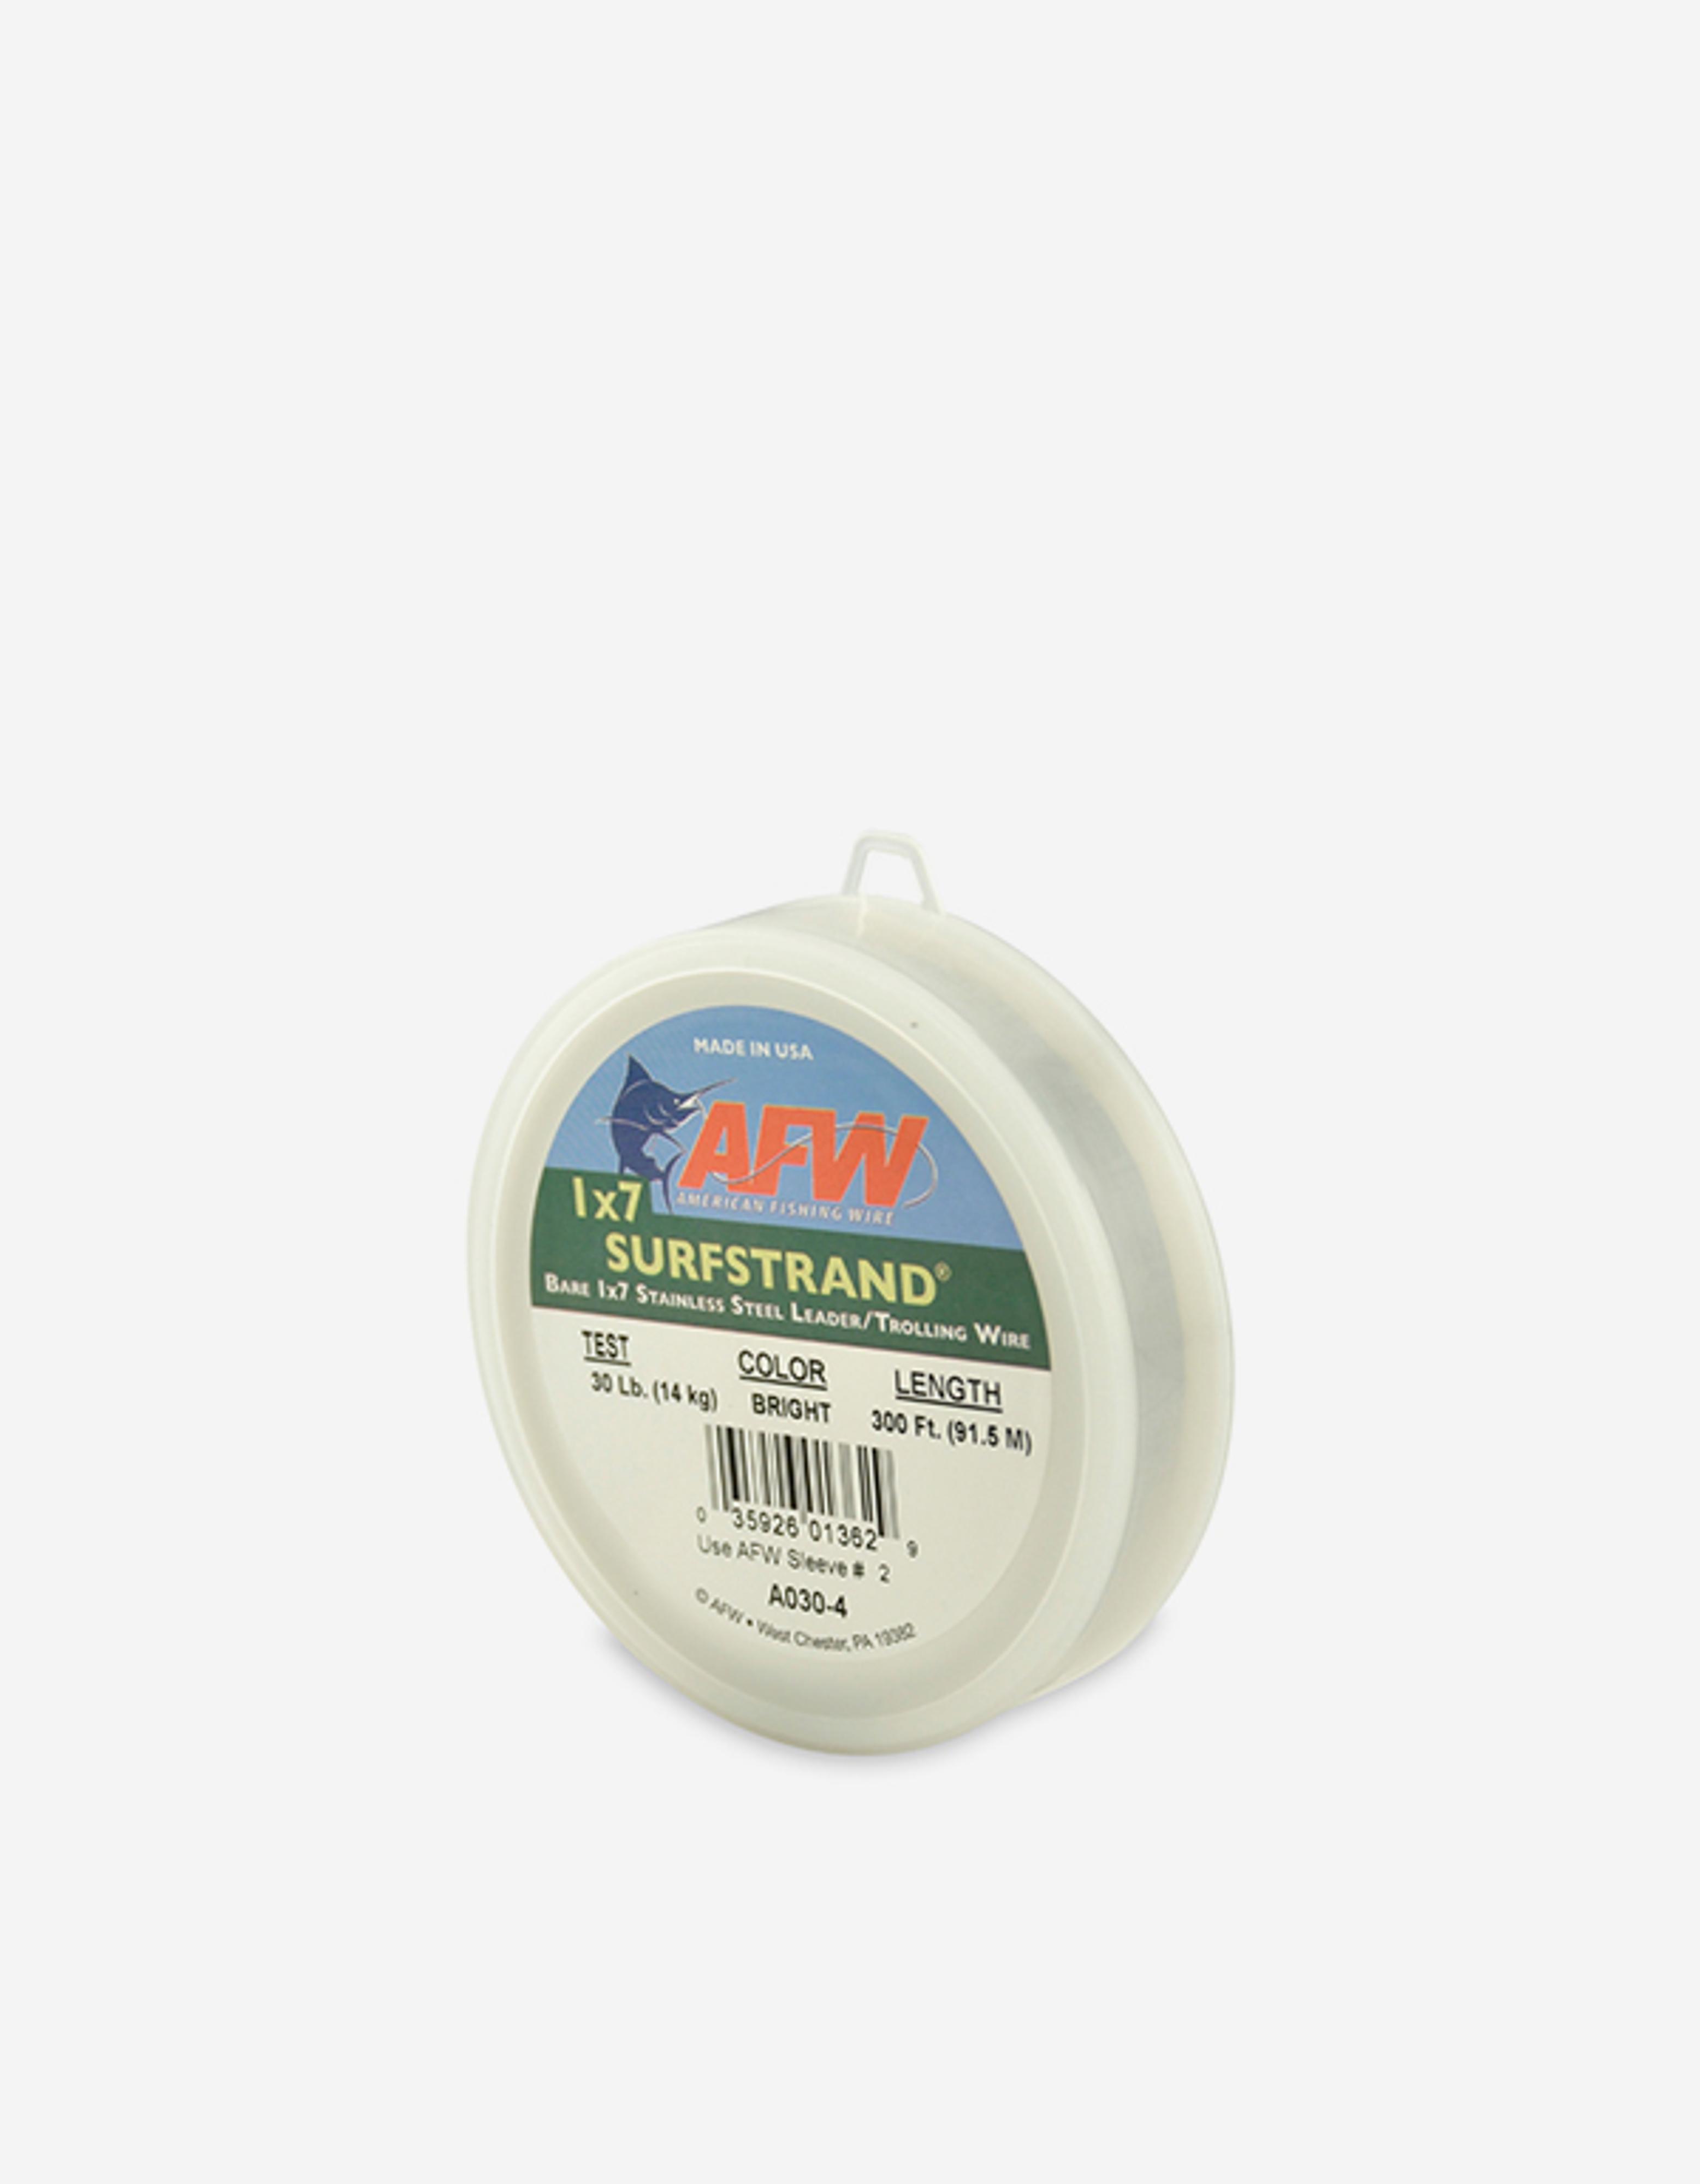 Surfstrand, Bare 1x7 Stainless Steel Leader Wire, 30 lb (14 kg) test, .015  in (0.38 mm) dia, Bright, 300 ft (91.5 m): Fishermans Ideal Supply House